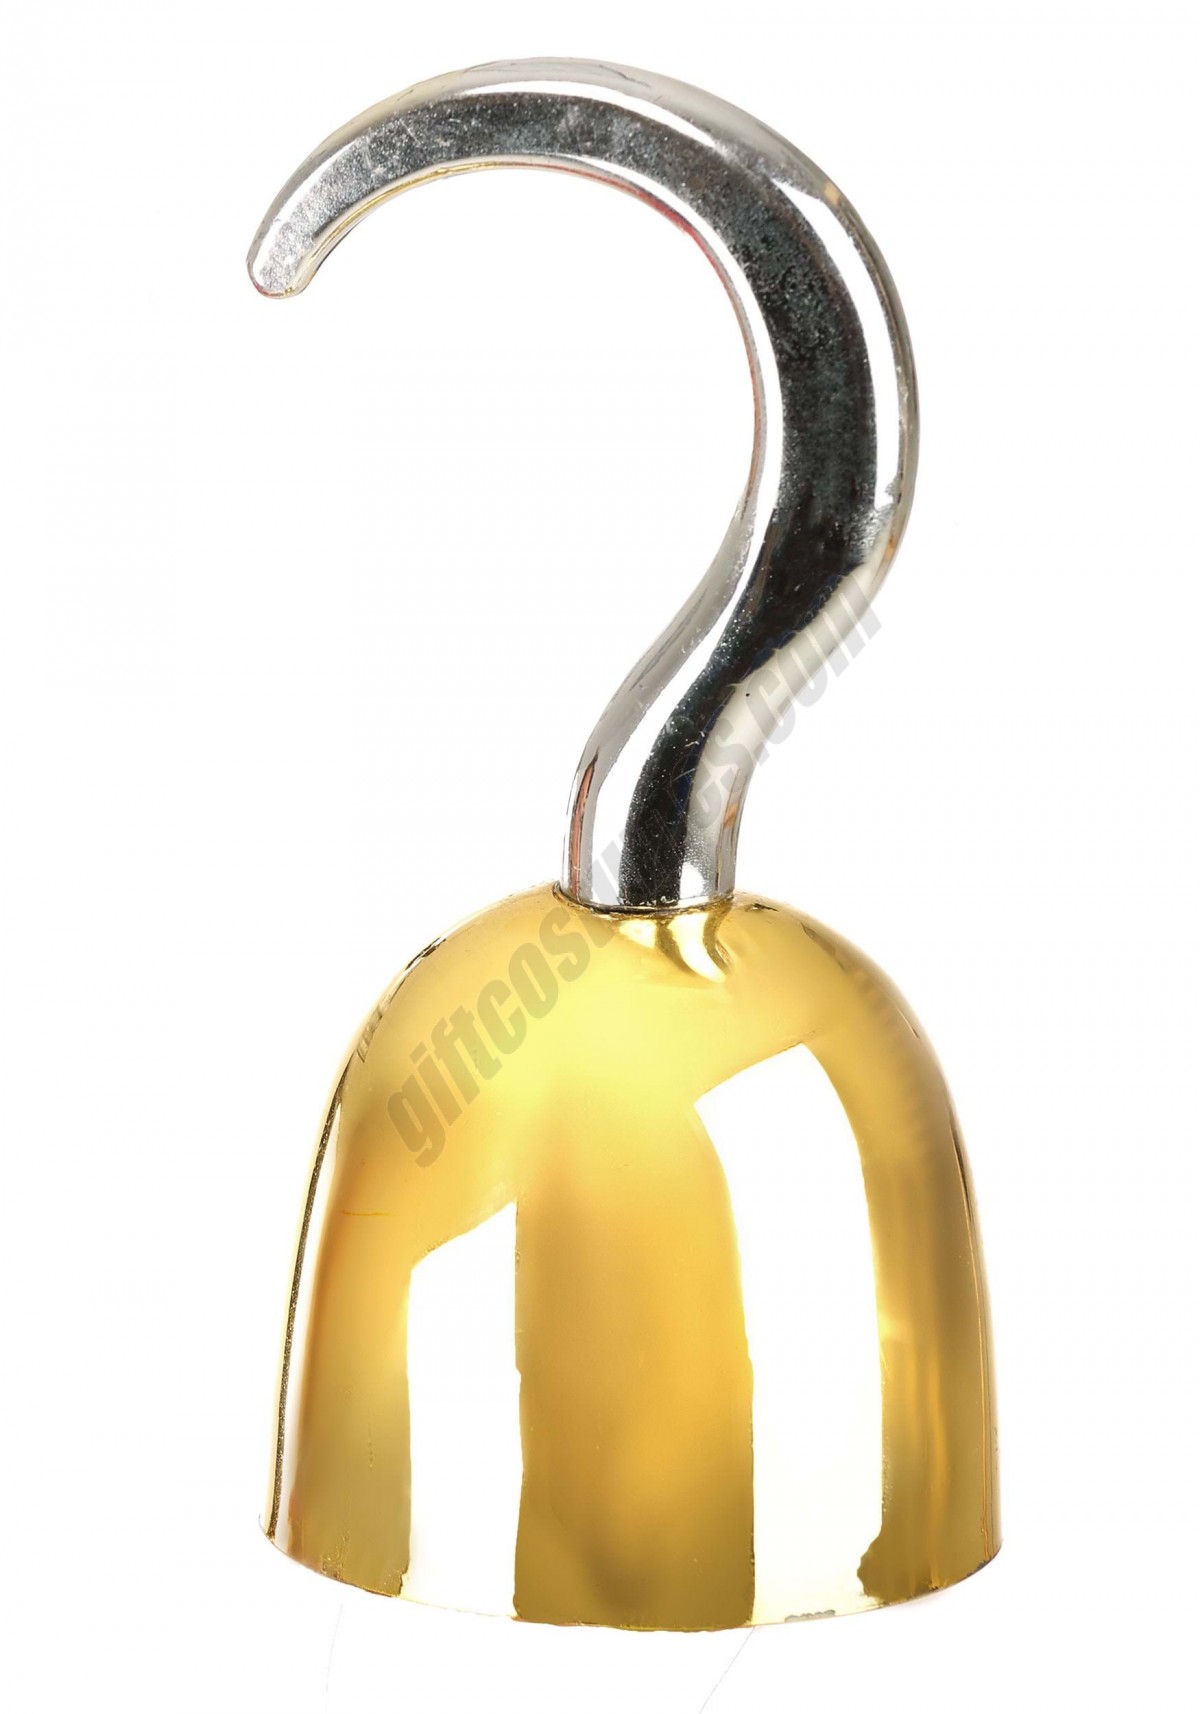 Silver Pirate Hook Promotions - -0